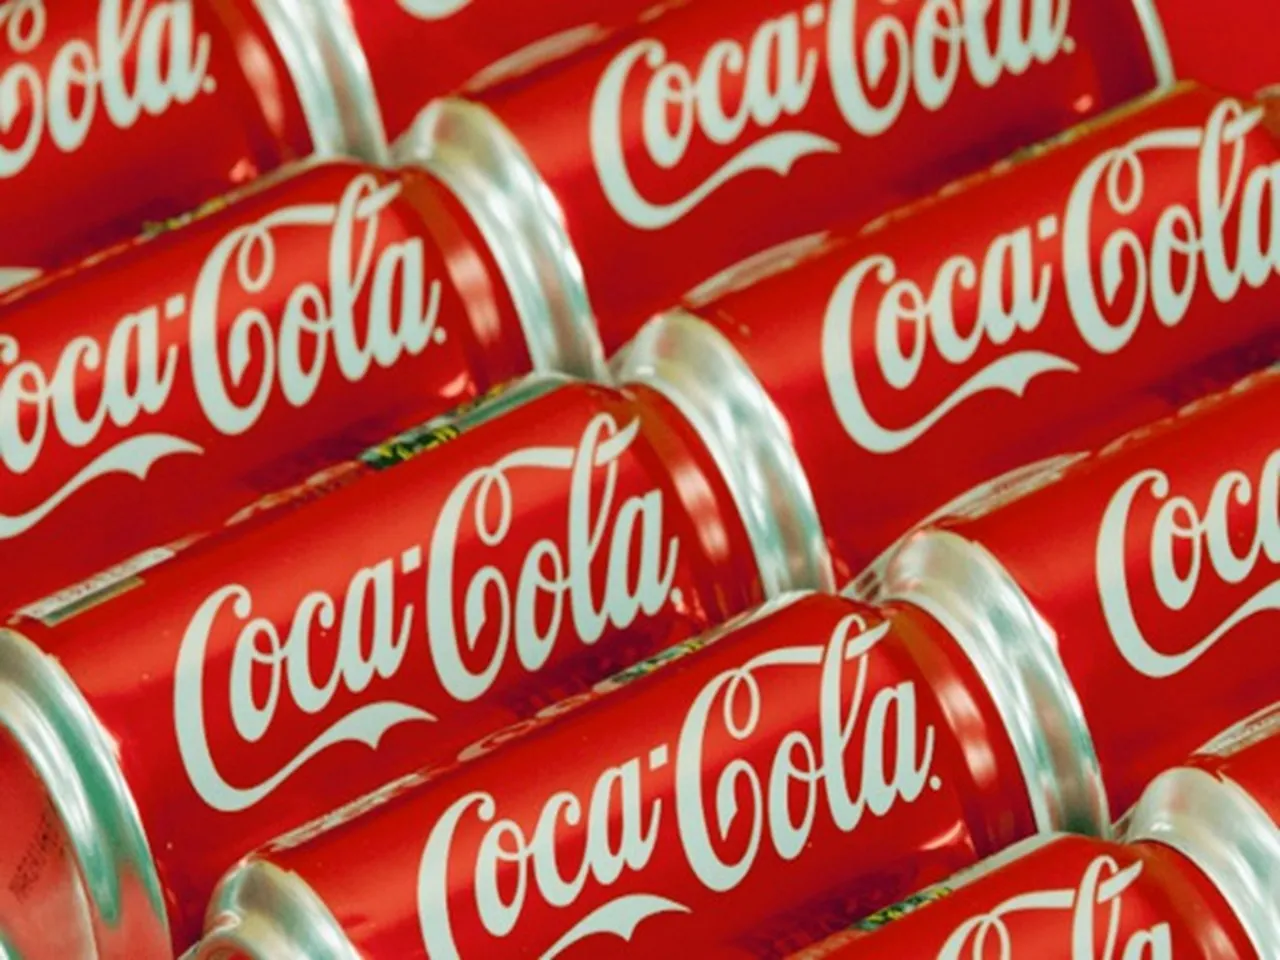 Kerala: Coca-Cola Company proposes returning 35 acres of land to govt